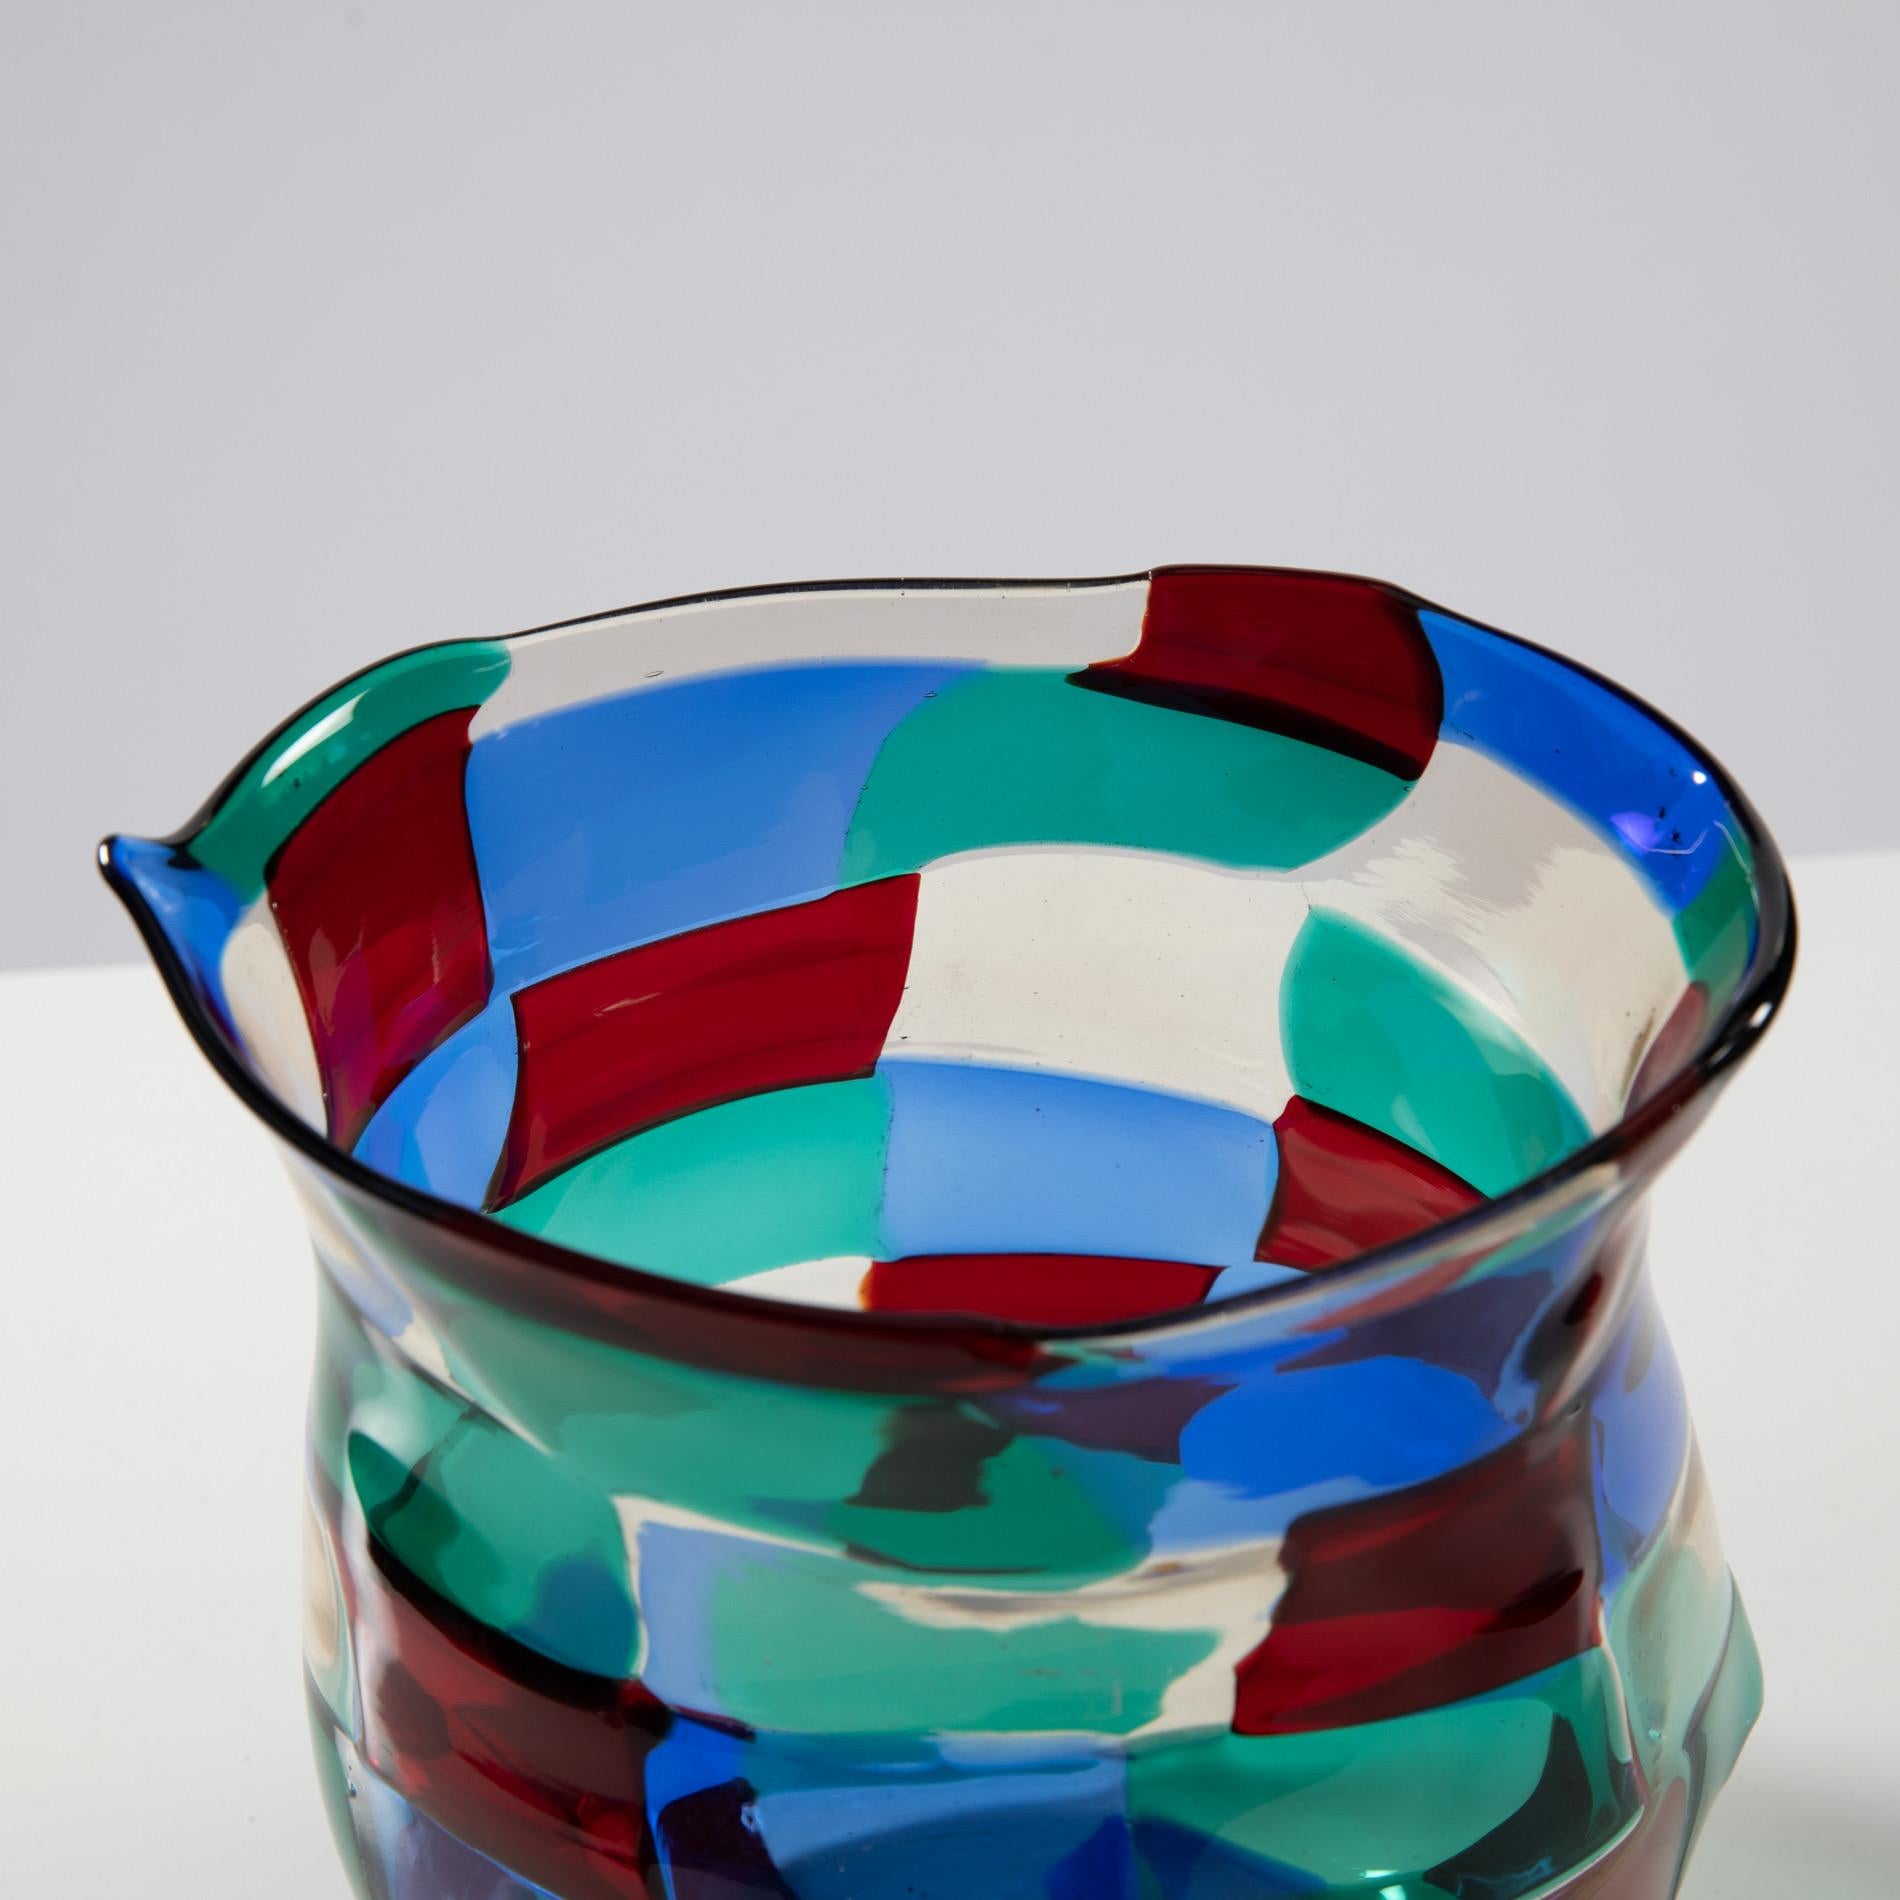 Murano mouth blown glass vase or bottle designed by Fulvio Bianconi for Venini in 1951. 
This variant of colors is often called by collectors “Paris”. 
It’s an arrangement of green, straw, red and blue mosaic tiles 

A rare shape characterized